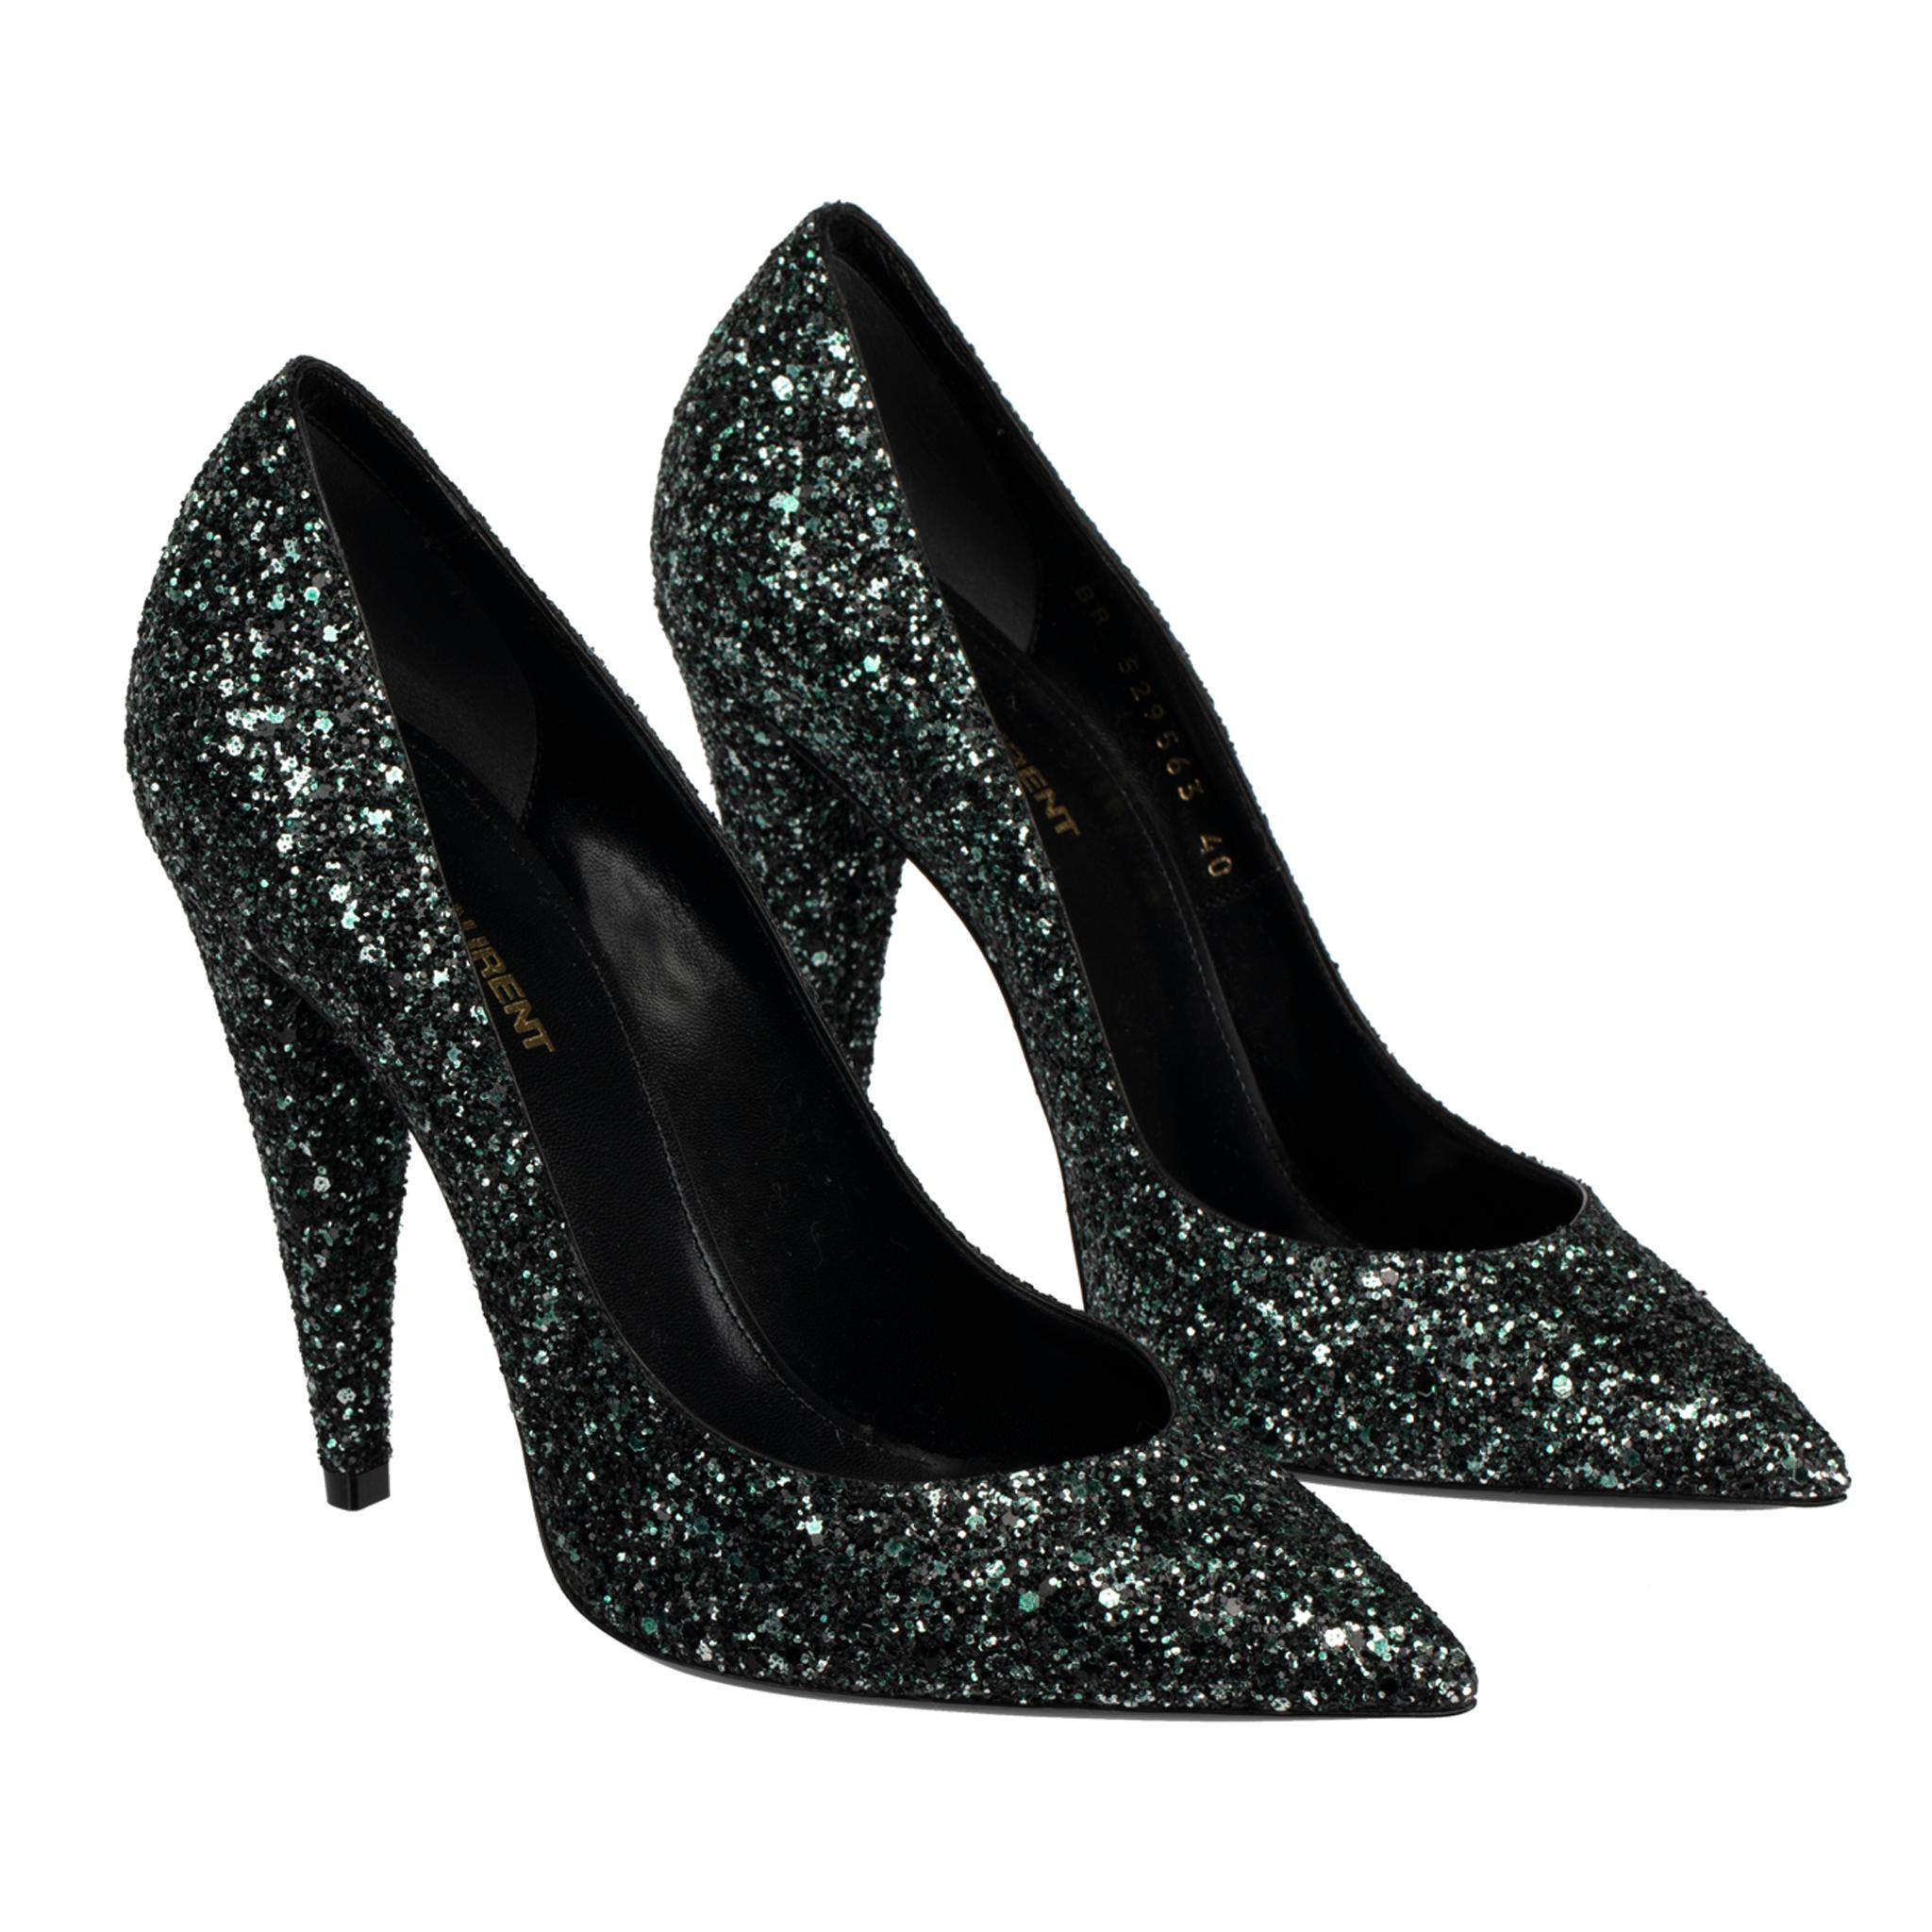 Yves Saint Laurent Decollete Era Black & Emerald Green Glitter Pumps 38 FR In New Condition For Sale In DOUBLE BAY, NSW